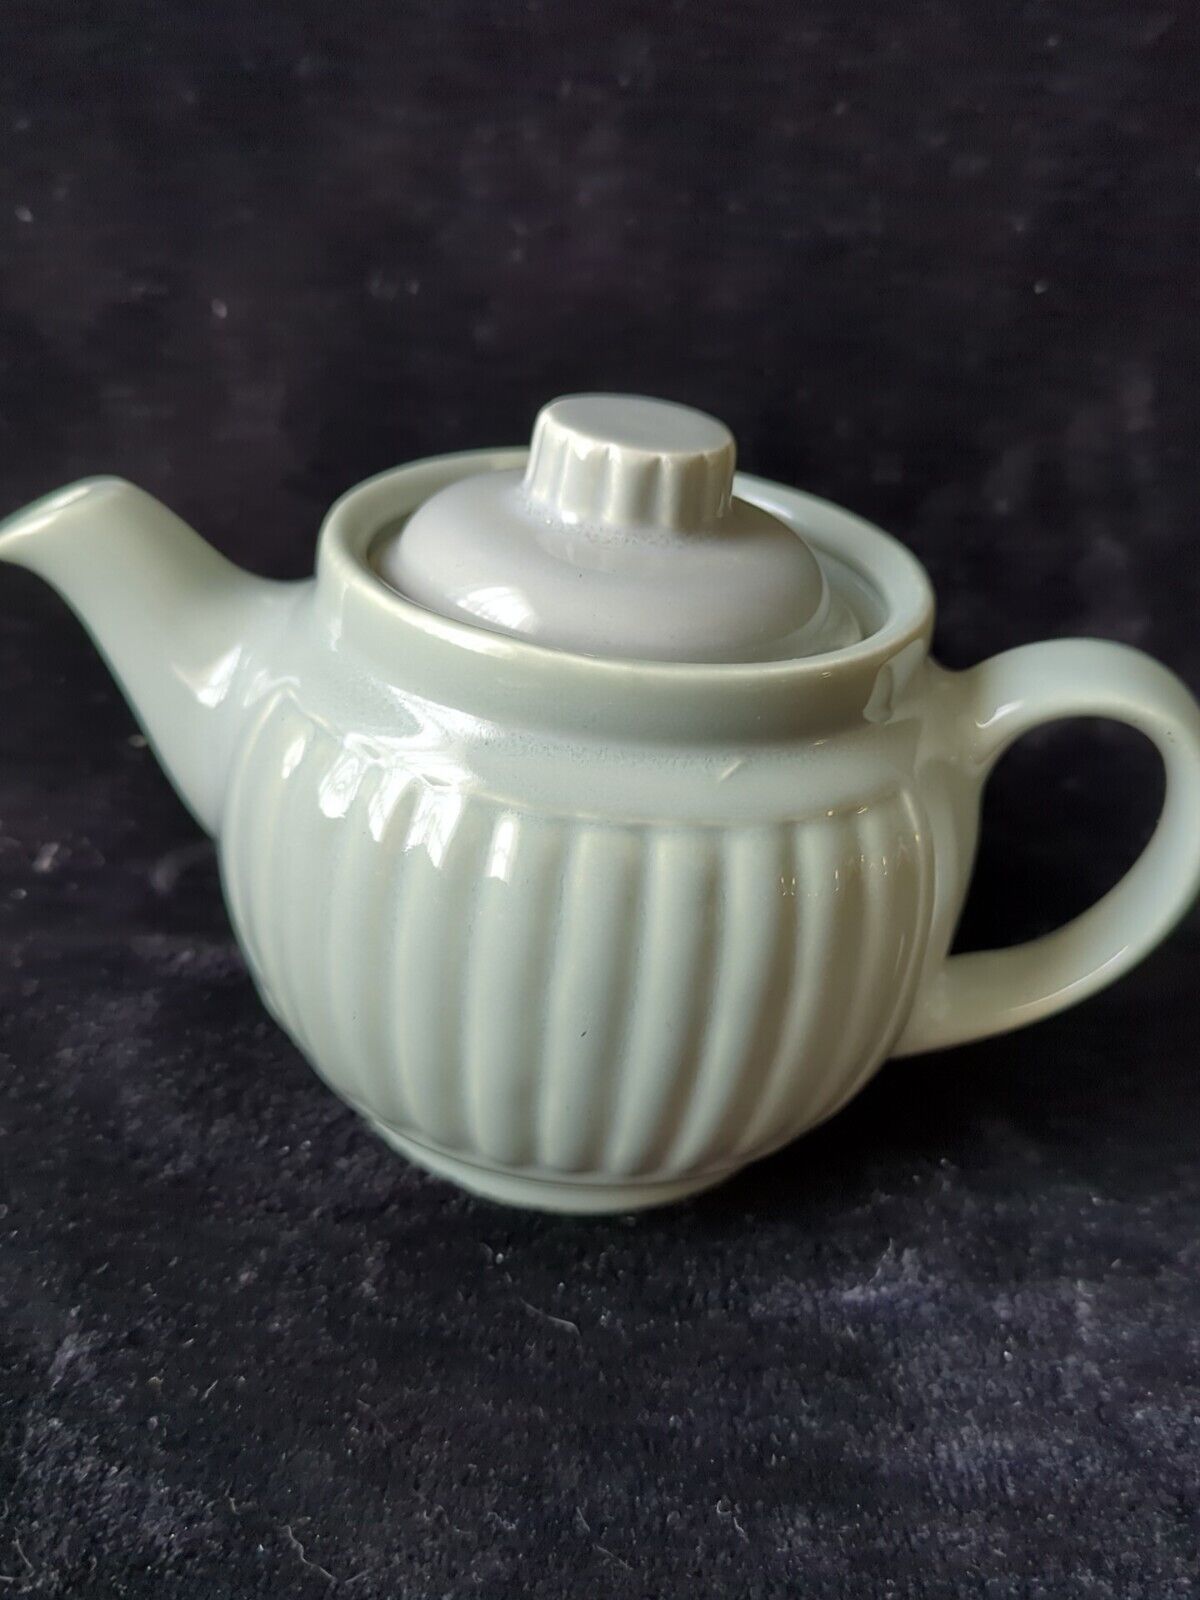 Vintage Gray Ribbed Teapot in Excellent Condition for Single Serving